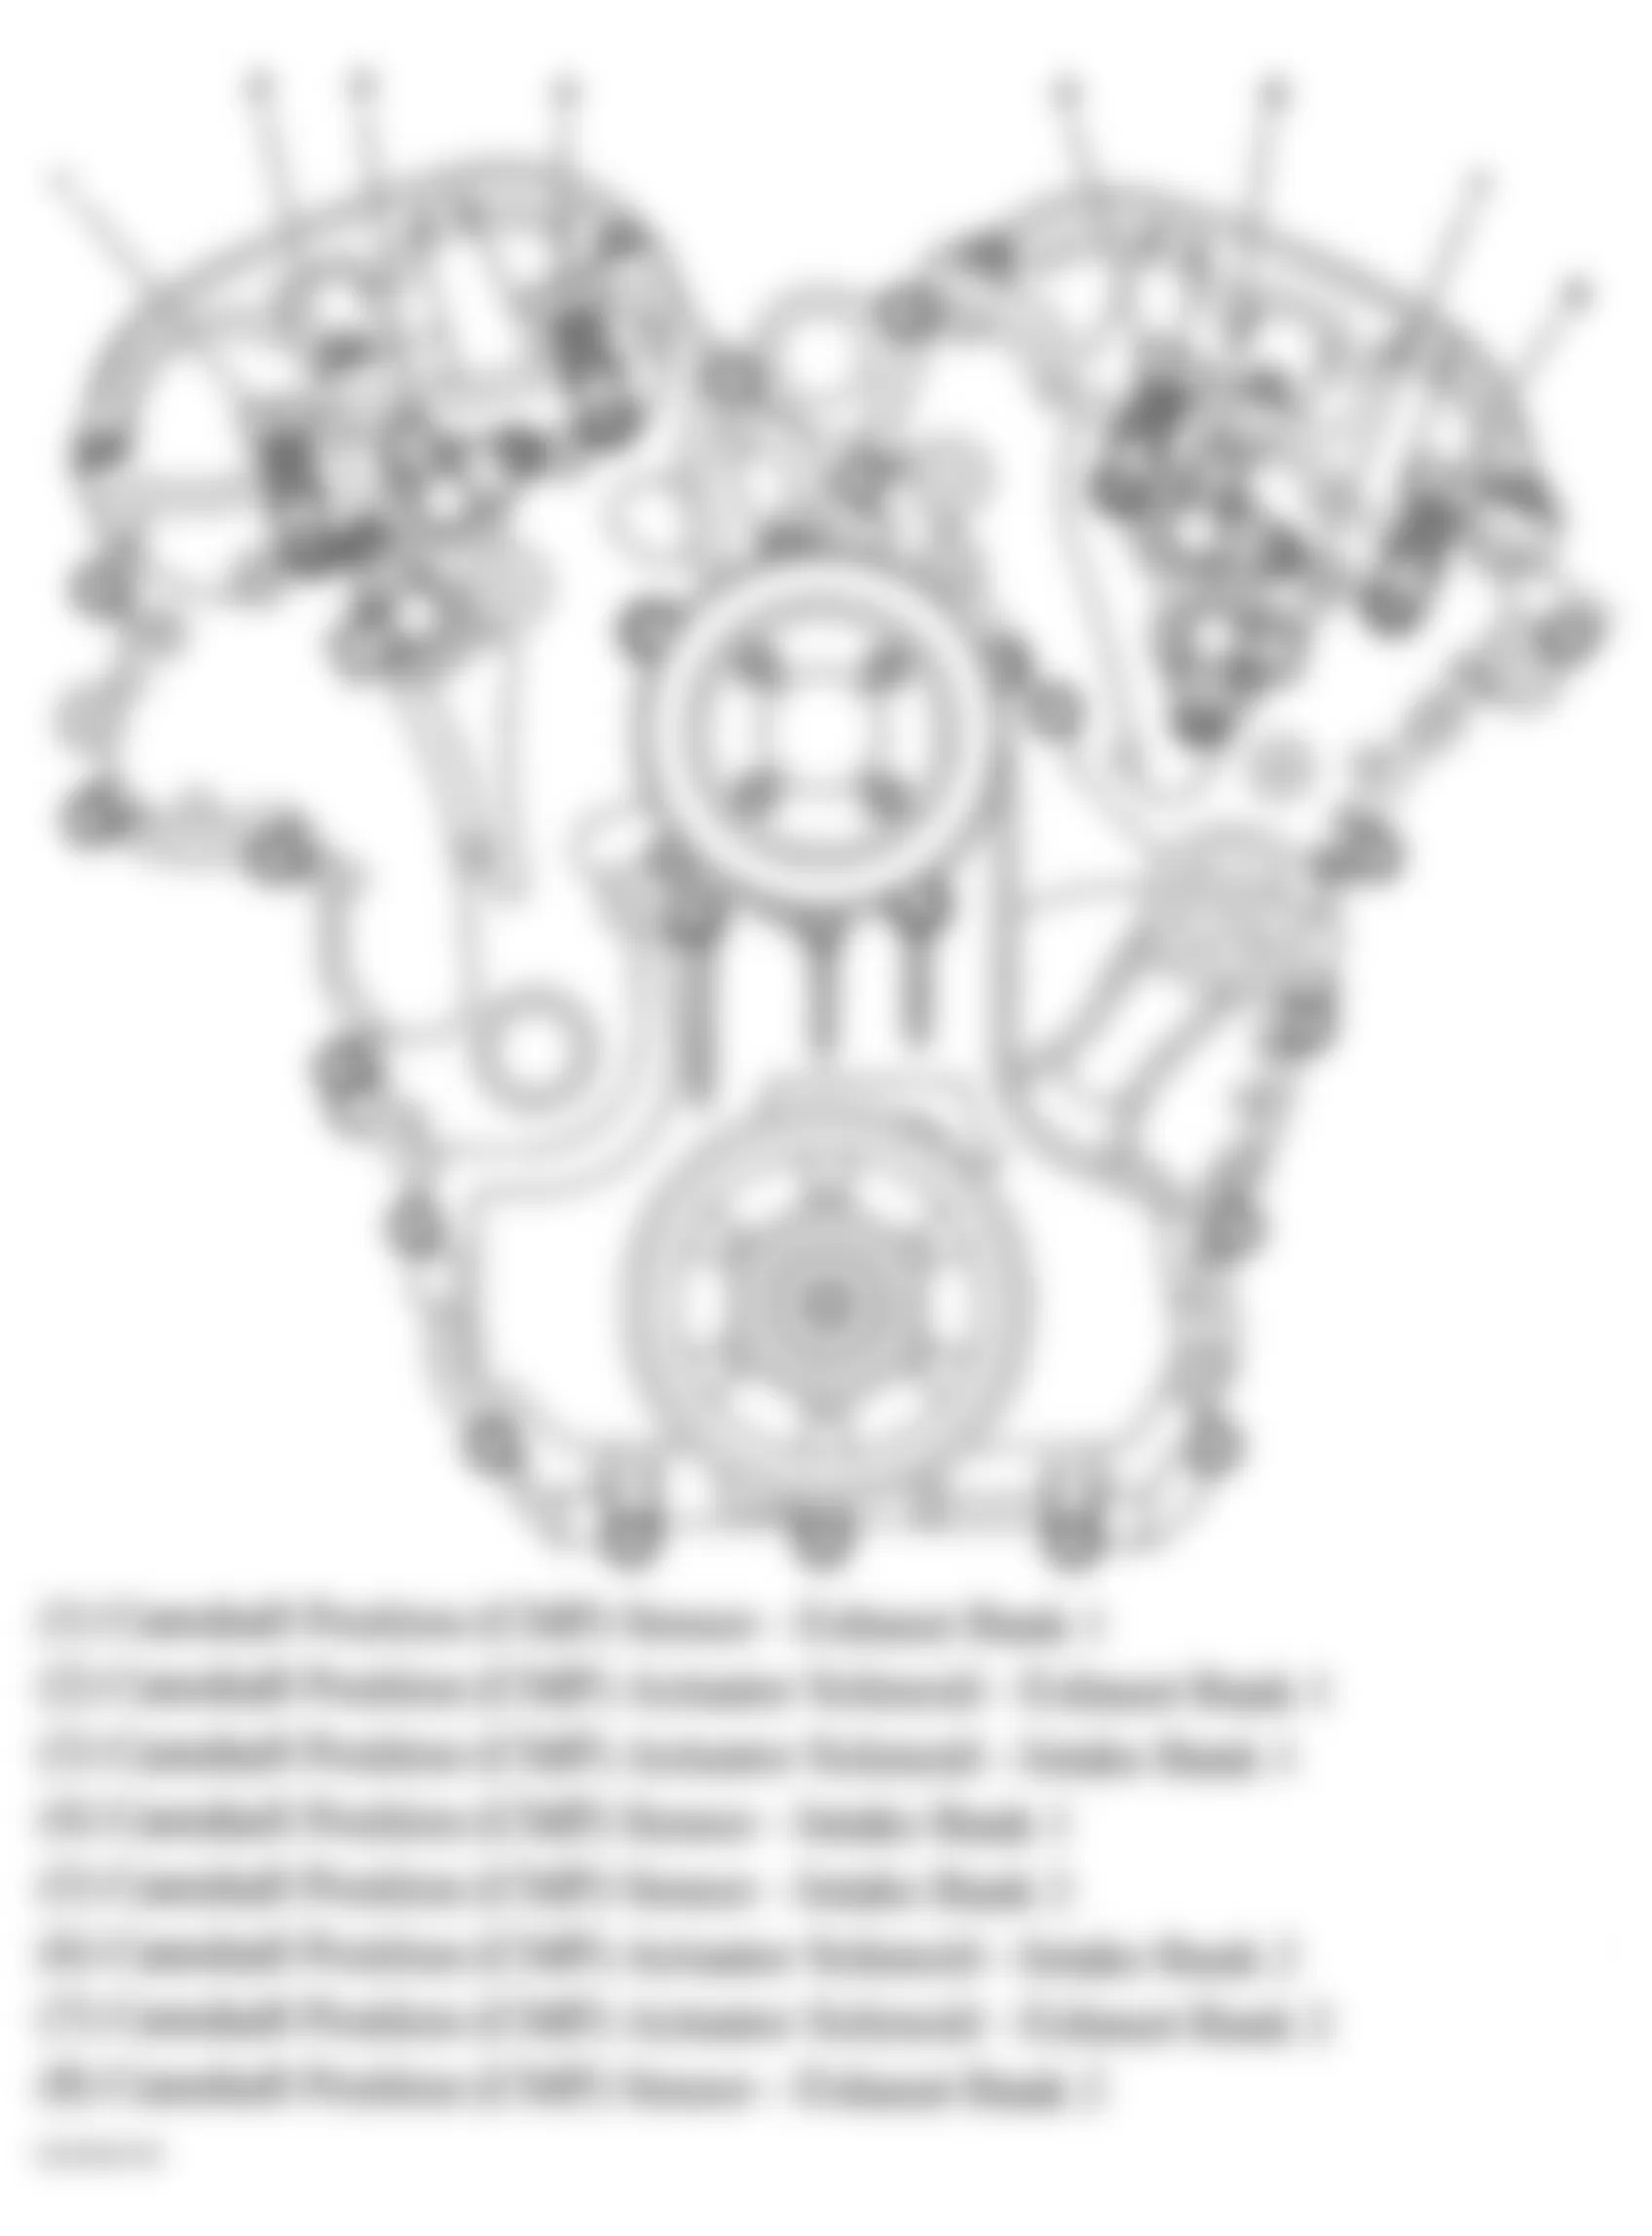 Buick LaCrosse CXS 2008 - Component Locations -  Front Of Engine (3.6L)